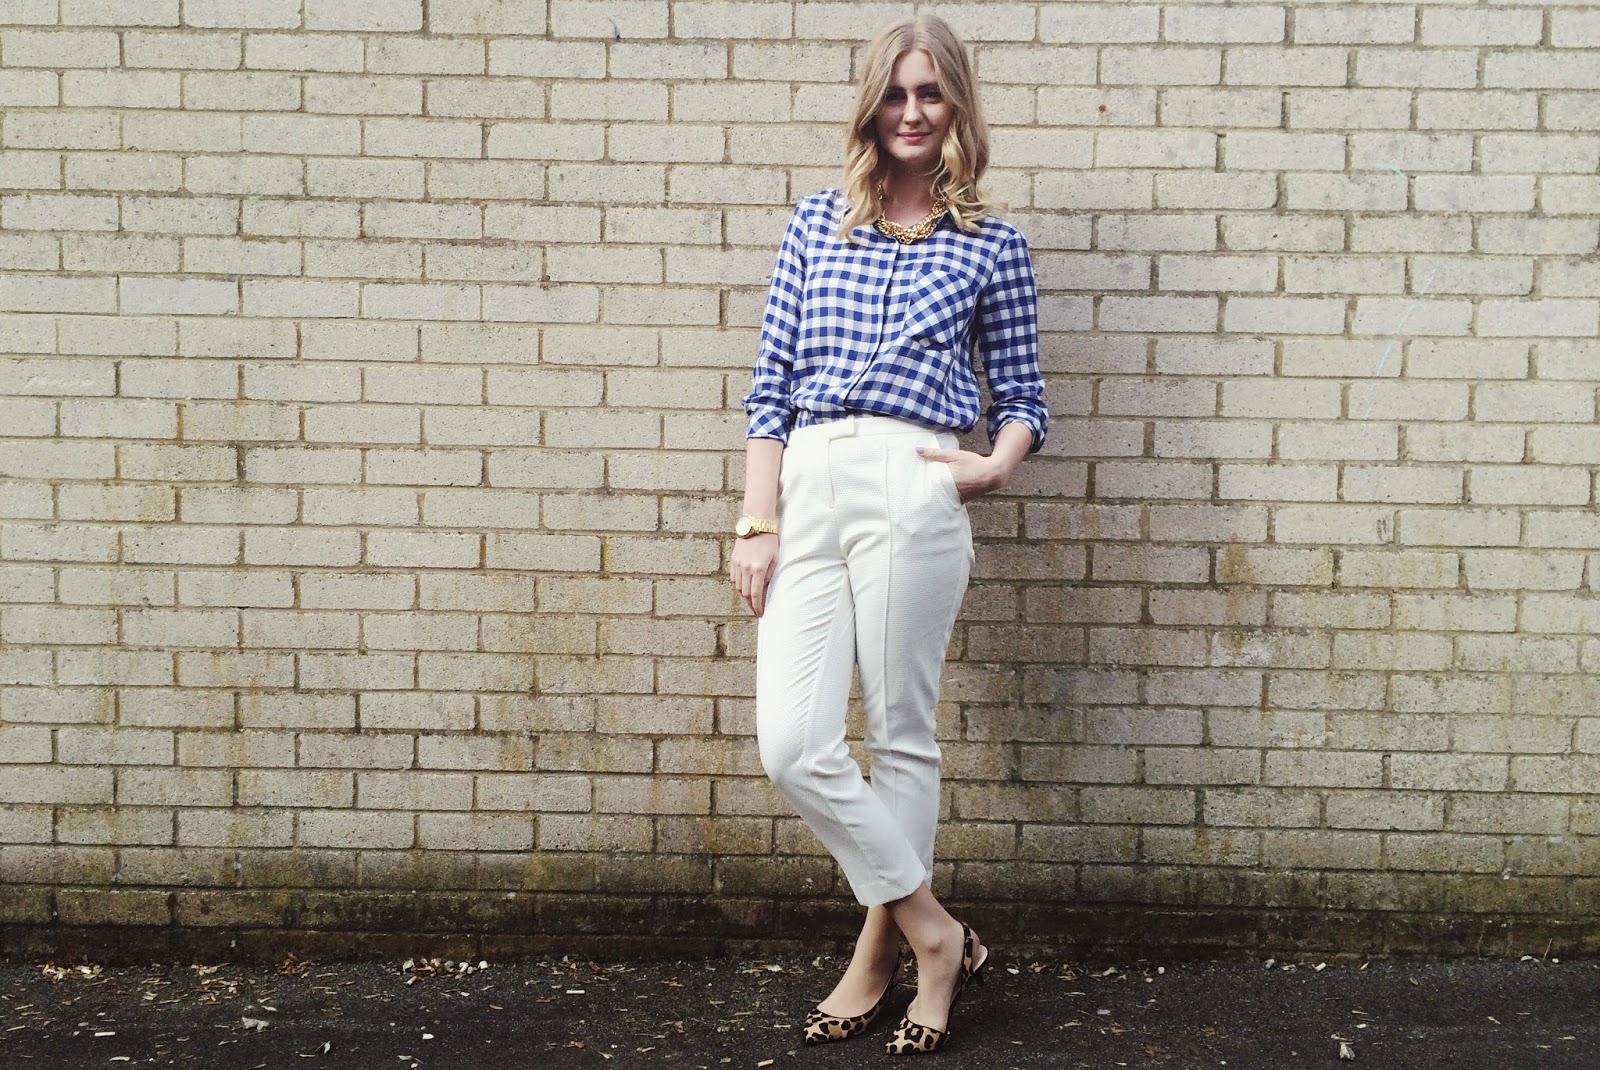 FashionFake, a UK fashion and lifestyle blog. Zara gingham shirt and Primark white trousers add a spring brightness to this simple yet stylish outfit.